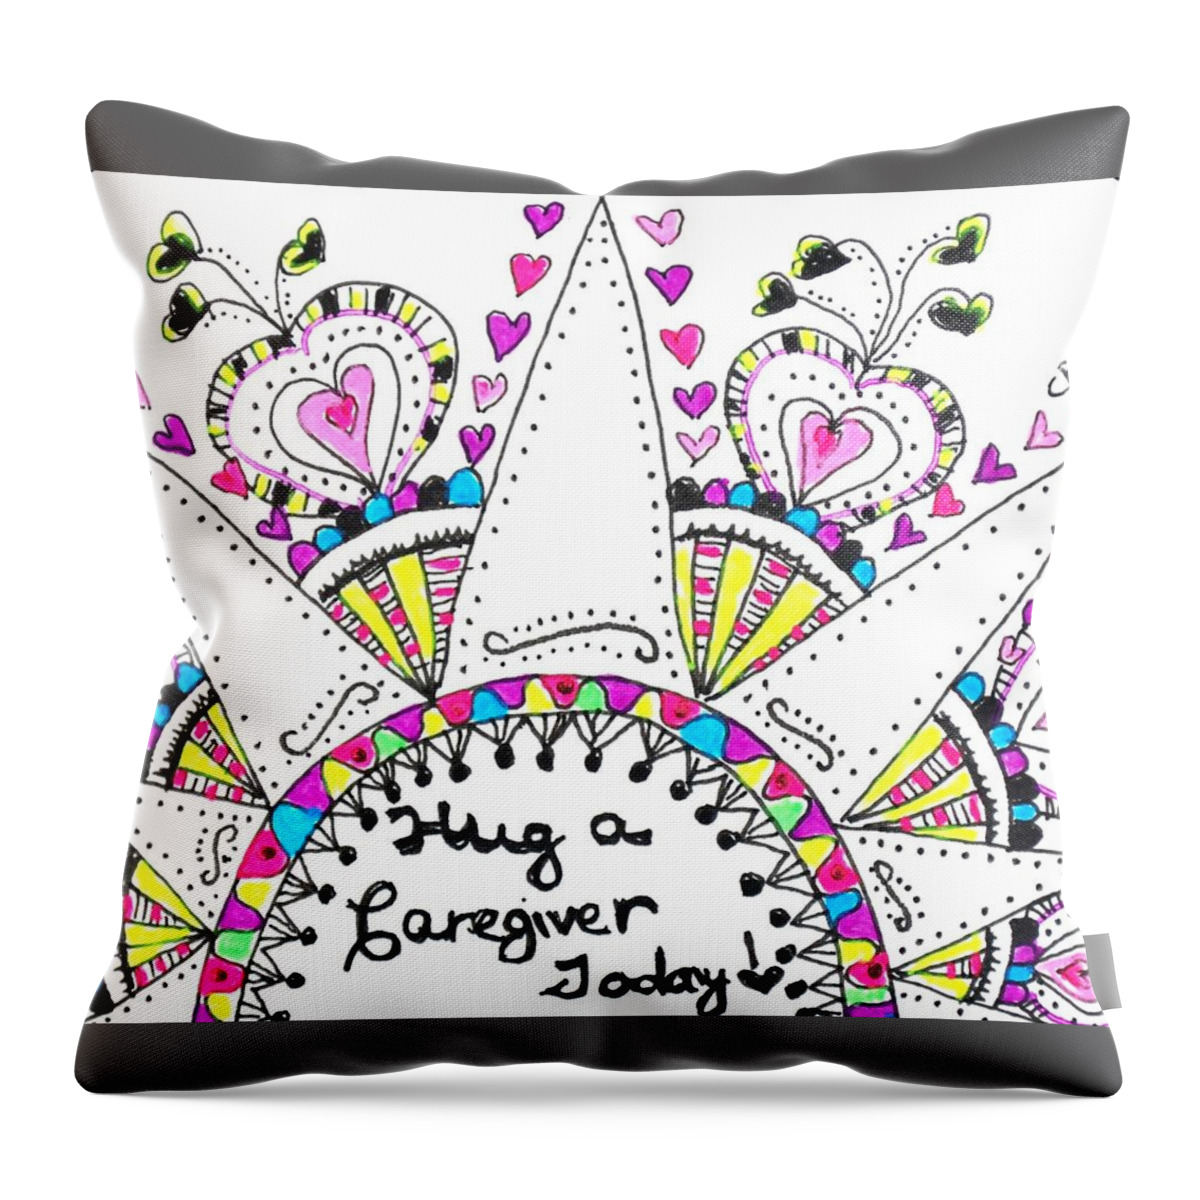 Caregiver Throw Pillow featuring the drawing Caregiver Crown Of Hearts by Carole Brecht